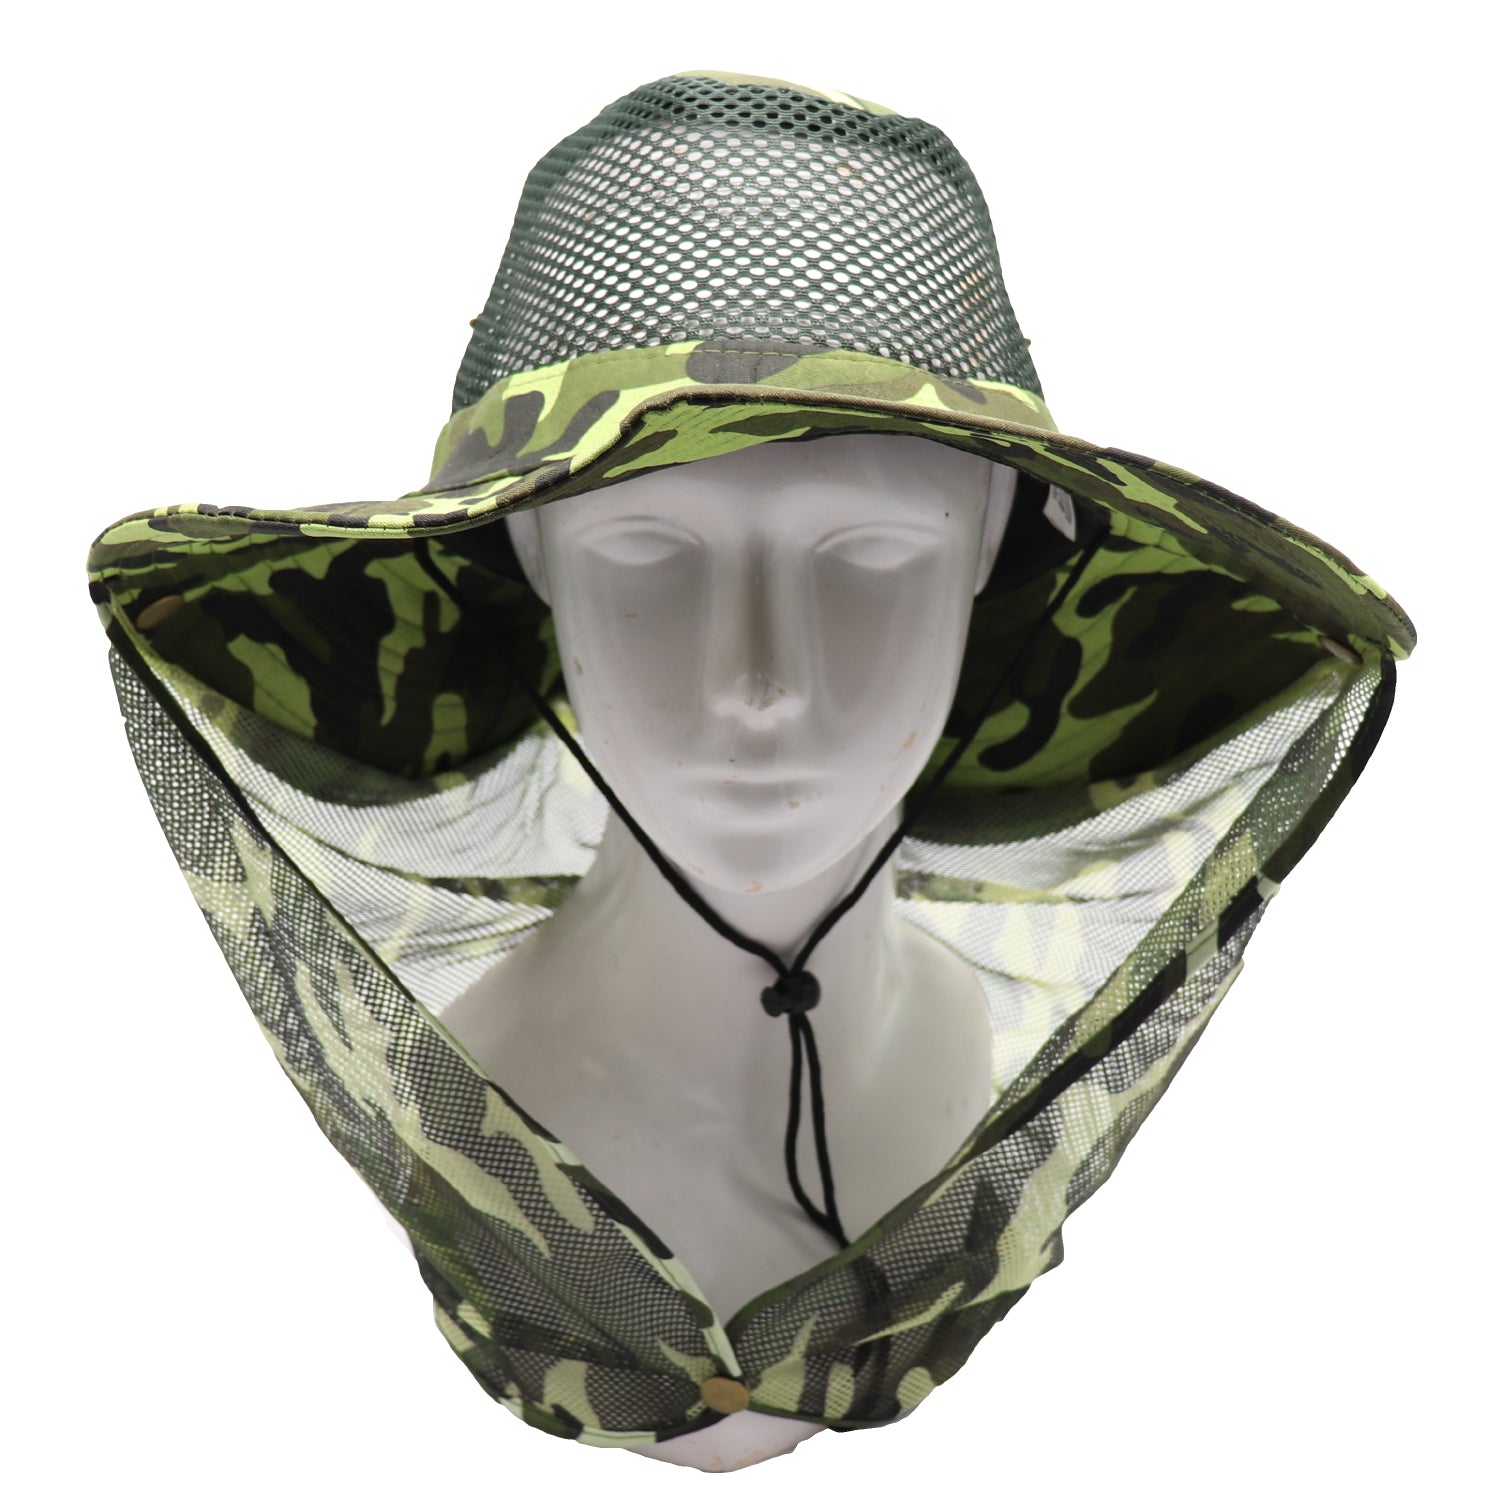 Bucket Flap Boonie Slouch Hat Wide Brim Mesh Crown Neck UV Protect Breathable, Forest Camo